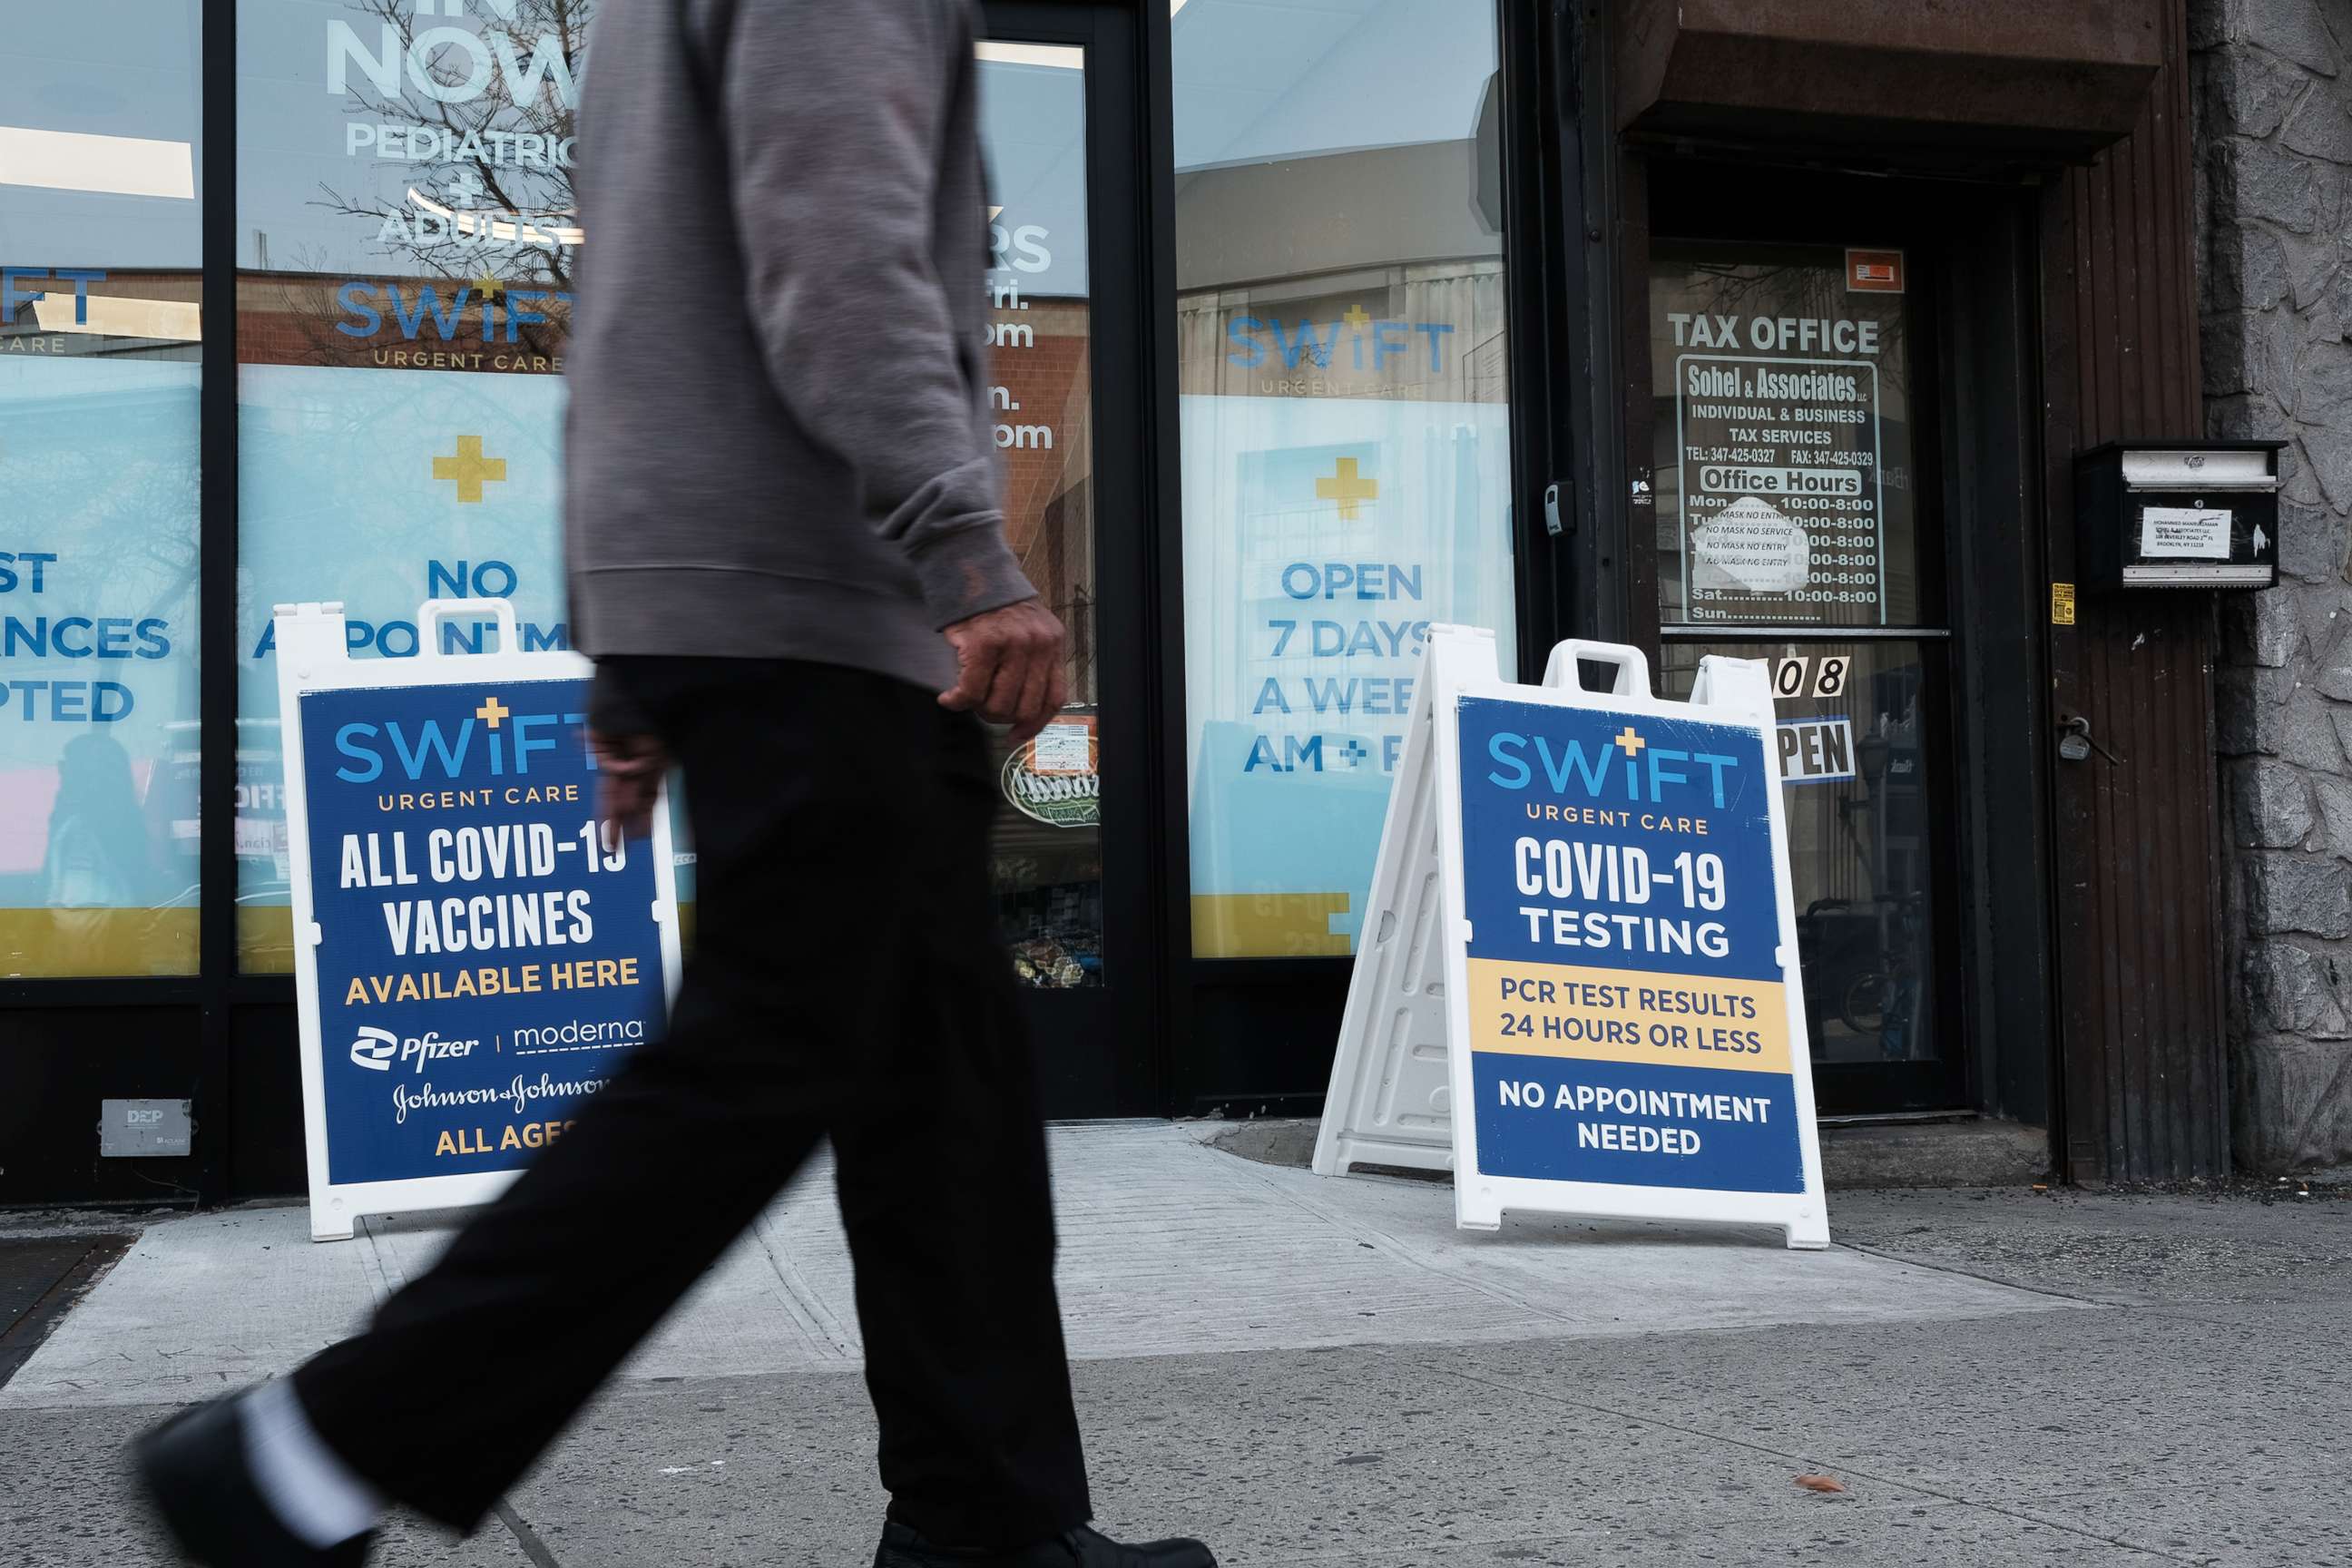 PHOTO: A COVID-19 testing and vaccination site is open on a Brooklyn street, April 18, 2022, in New York.